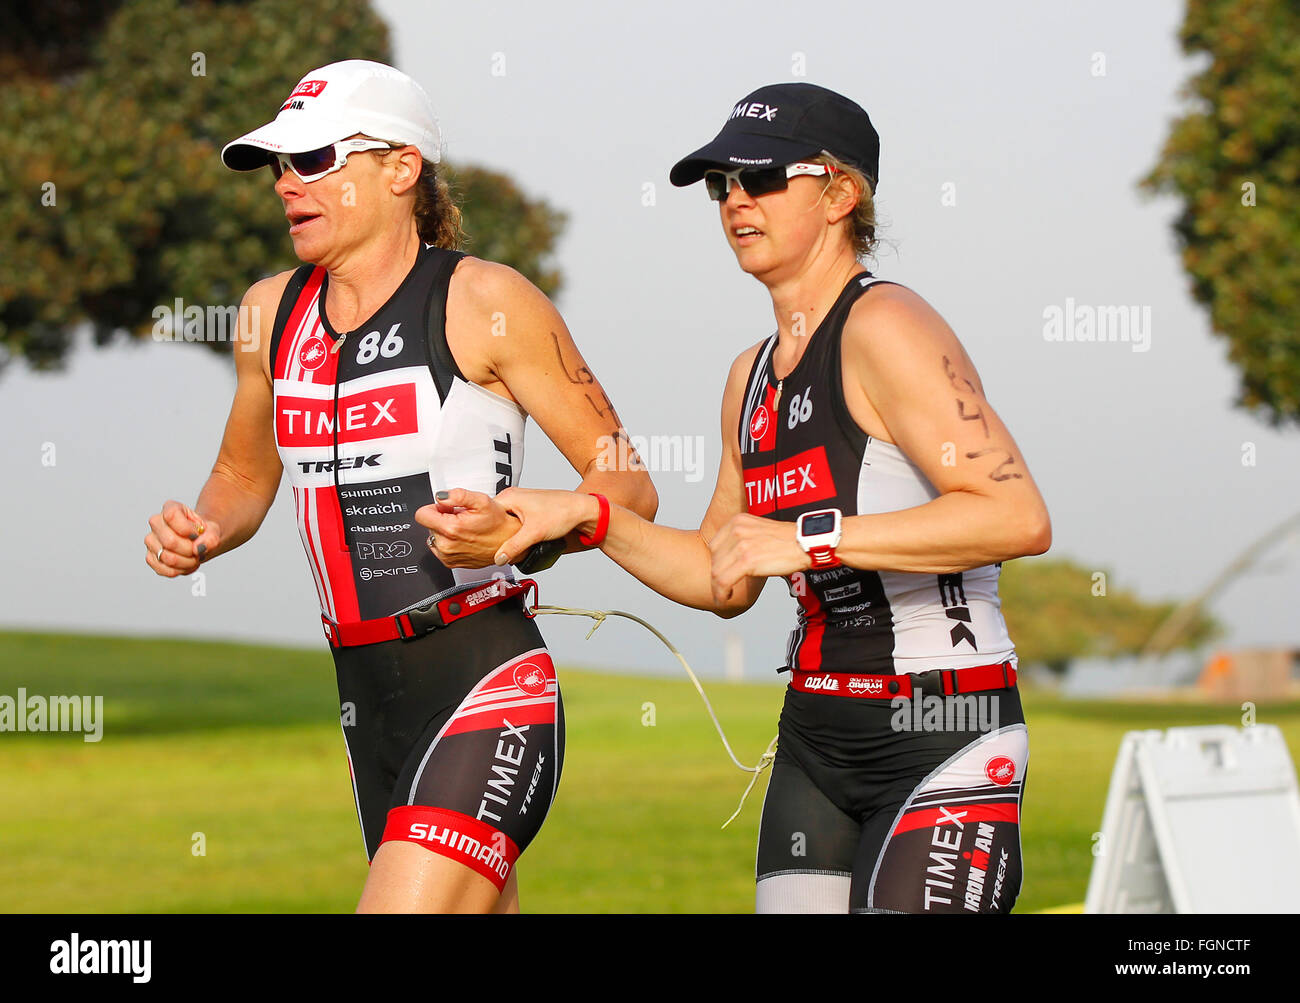 San Diego, CA, USA. 21st Feb, 2016. SAN DIEGO, CA -FEB 21, 2015 - | Susanne Davis, left, and Amy Dixon, a blind triathlete prepare to jump up a curb as they compete in the running portion of the Tritonman triathlon in Mission Bay. | Dixon is training for the Paralympics in Rio de Janeiro and Davis, a world Ironman Champion, is her guide and training partner. This was their first competition training together. (K.C. Alfred/ San Diego Union-Tribune © K.C. Alfred/U-T San Diego/ZUMA Wire/Alamy Live News Stock Photo